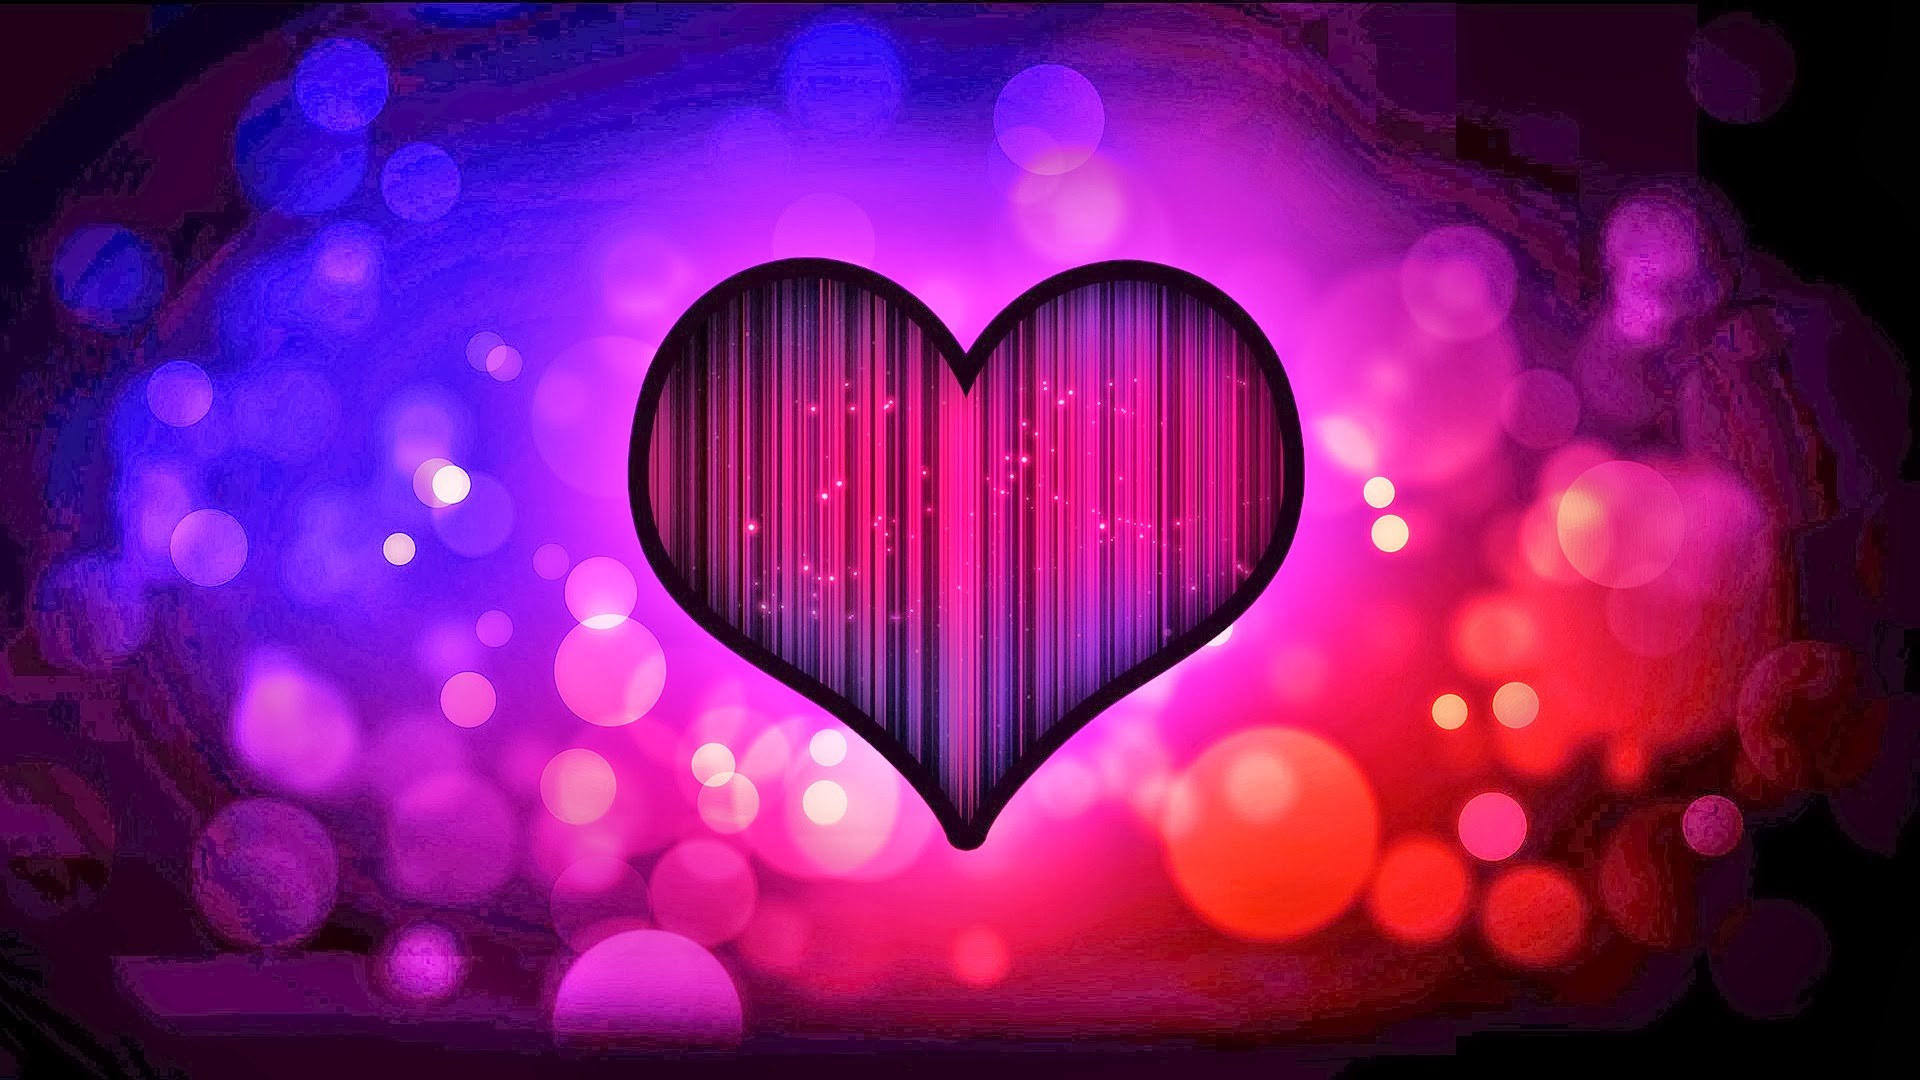 1920x1080 Love heart abstract hd wallpaper image photo picture